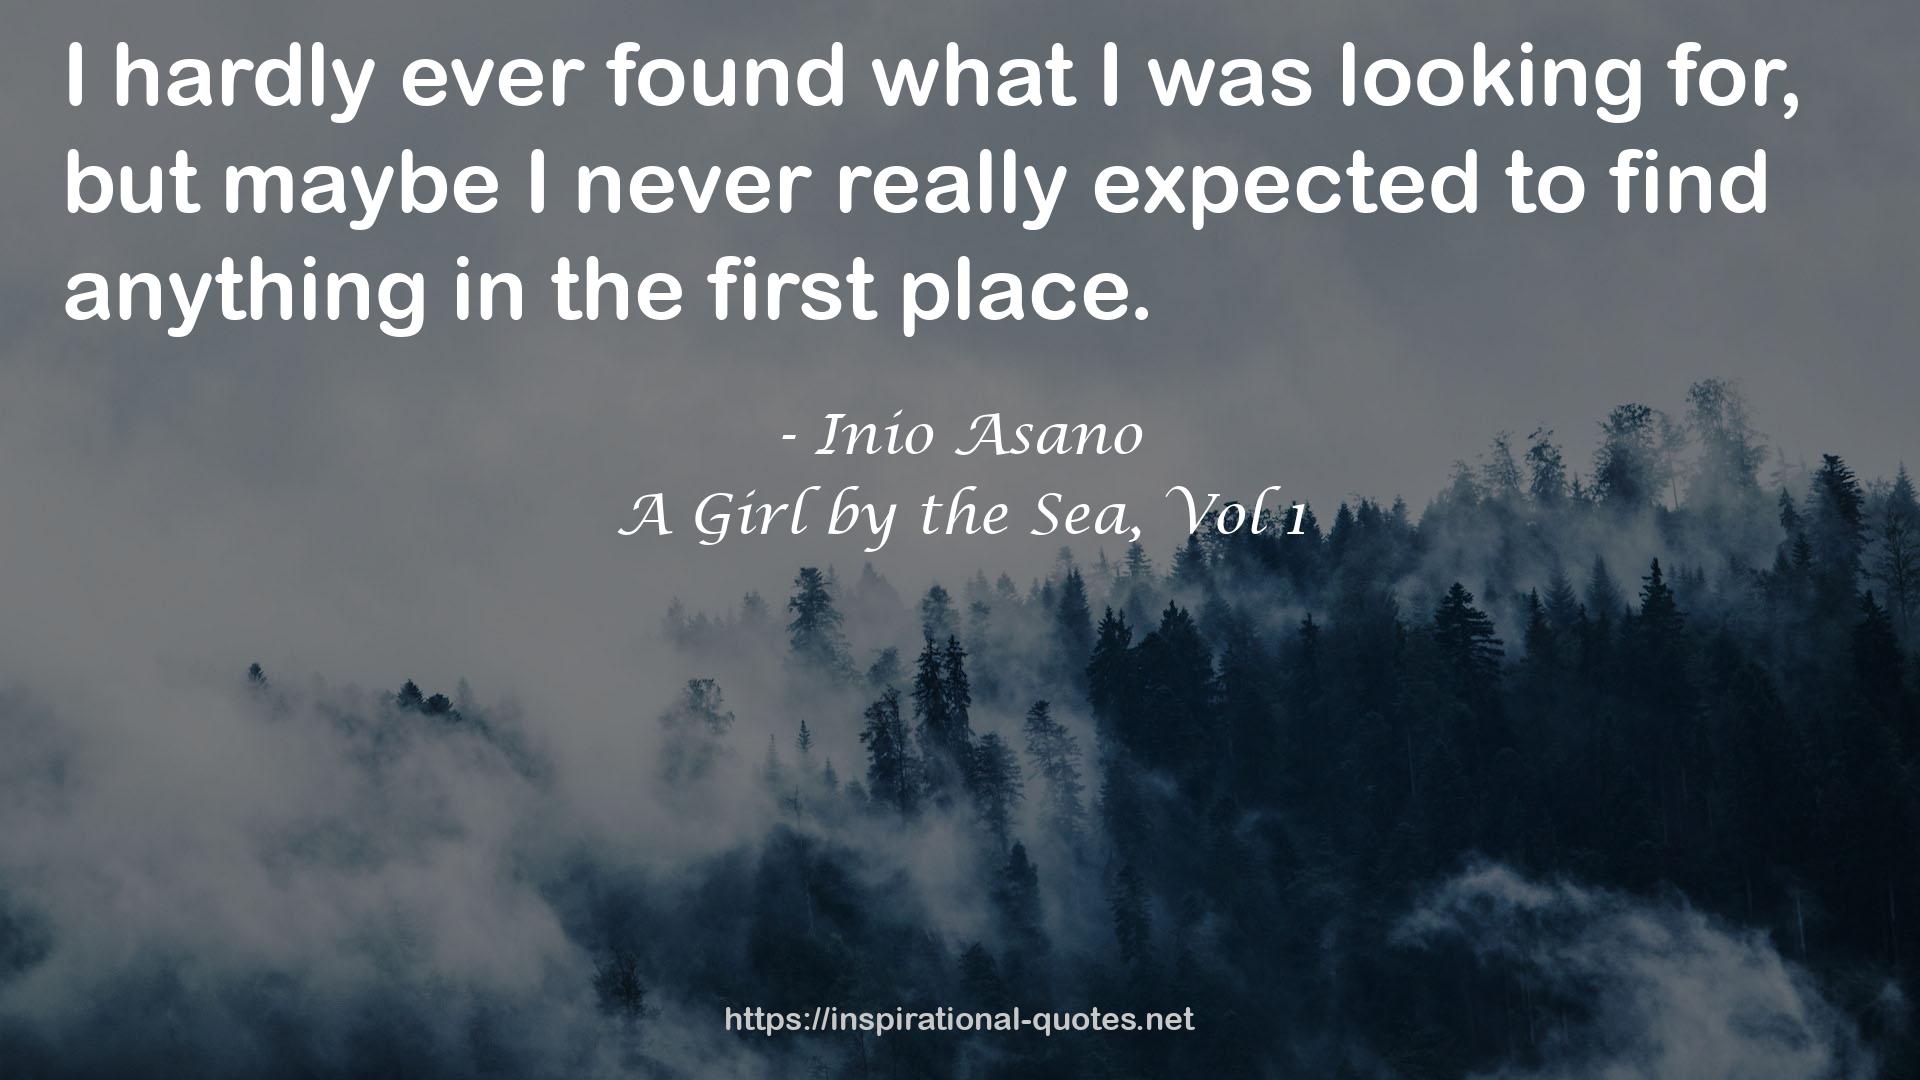 A Girl by the Sea, Vol 1 QUOTES